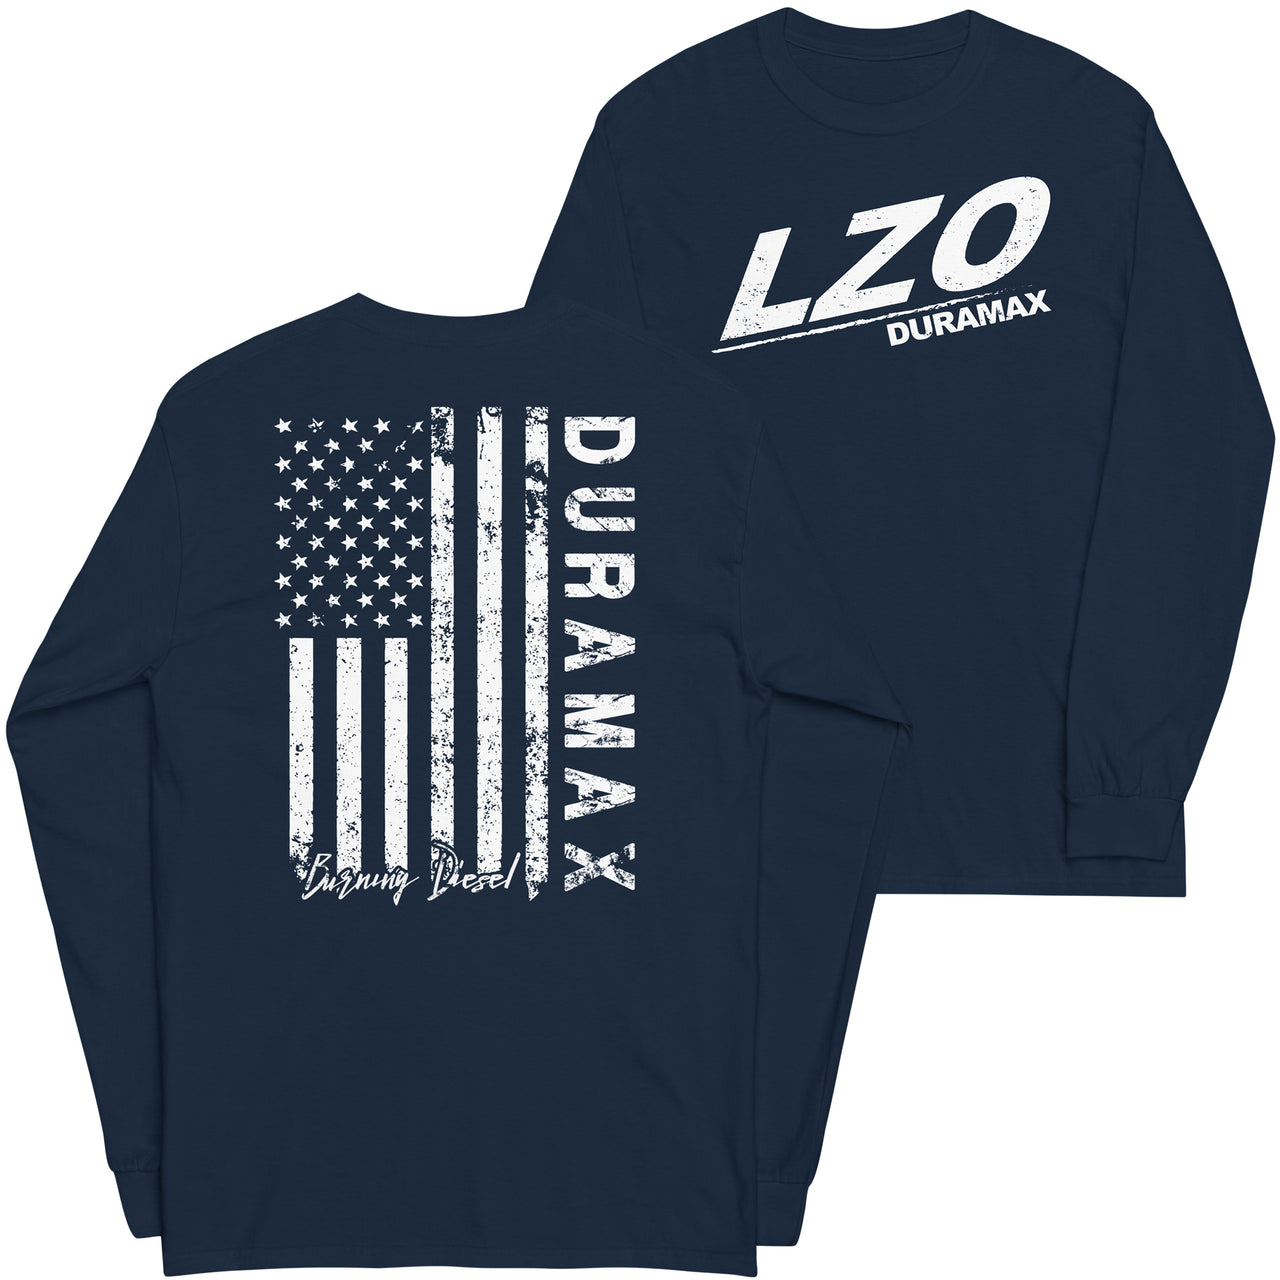 LZO Duramax Long Sleeve Shirt With American Flag Design in navy